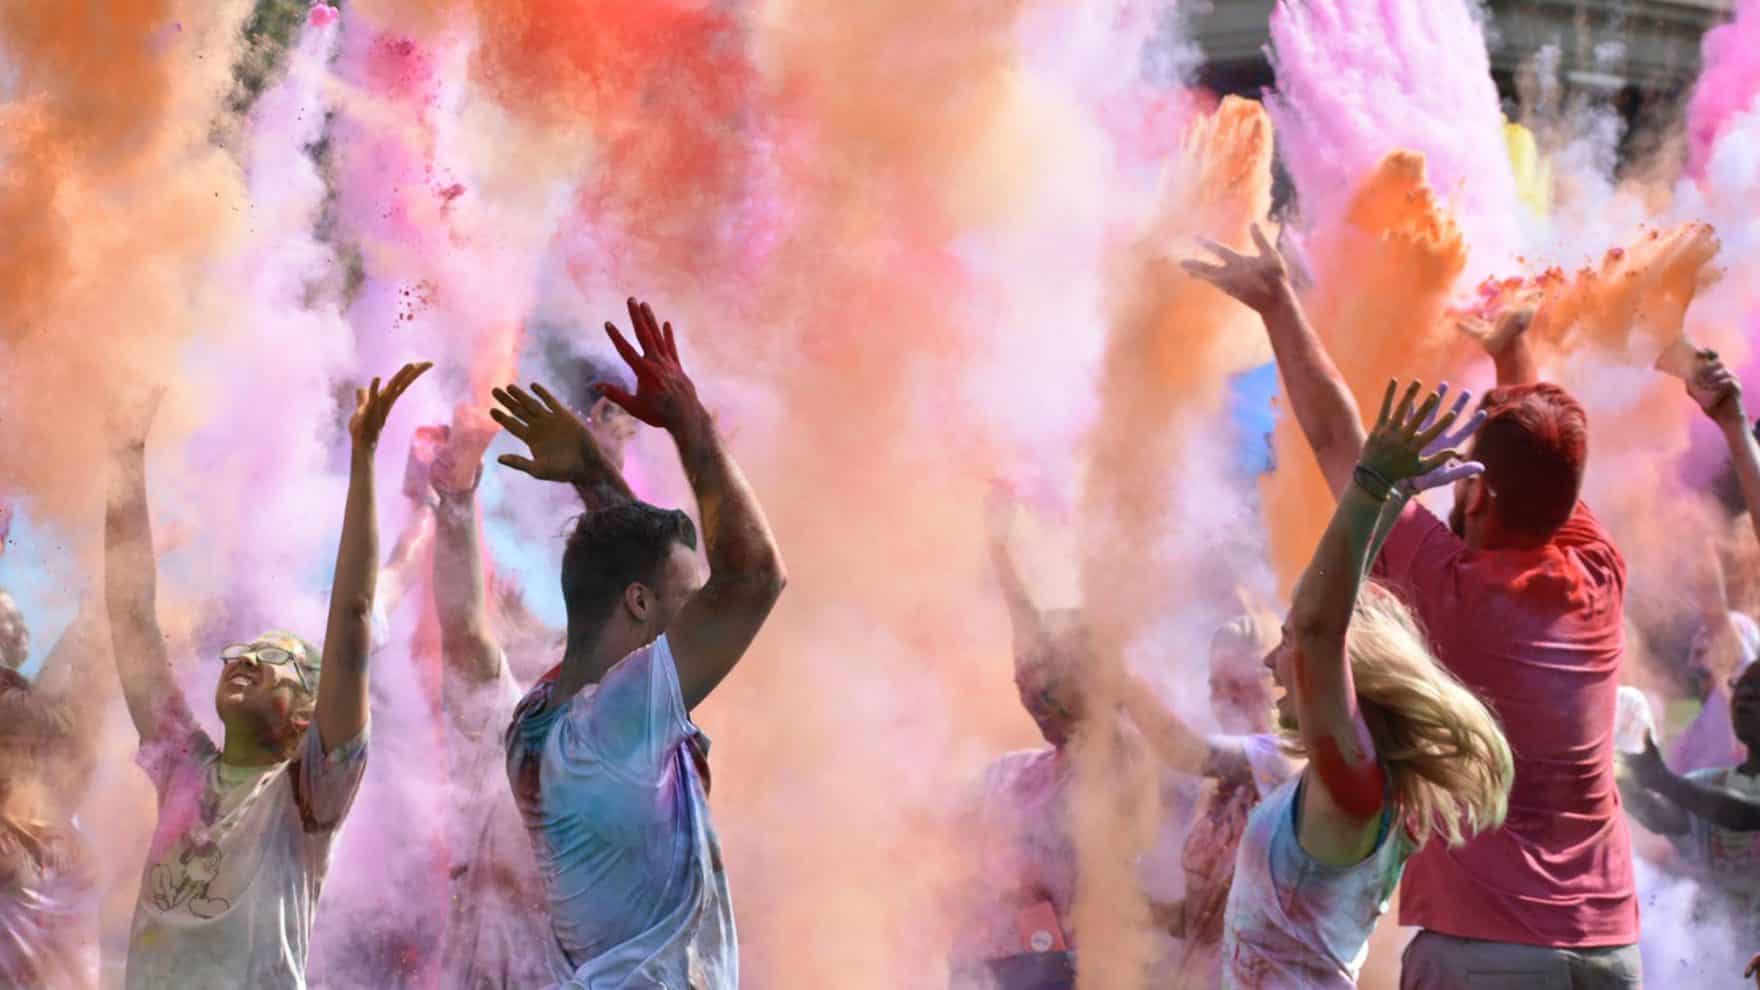 Students enjoy a color run at Regent, a university that offers a range of student organizations and leadership opportunities.